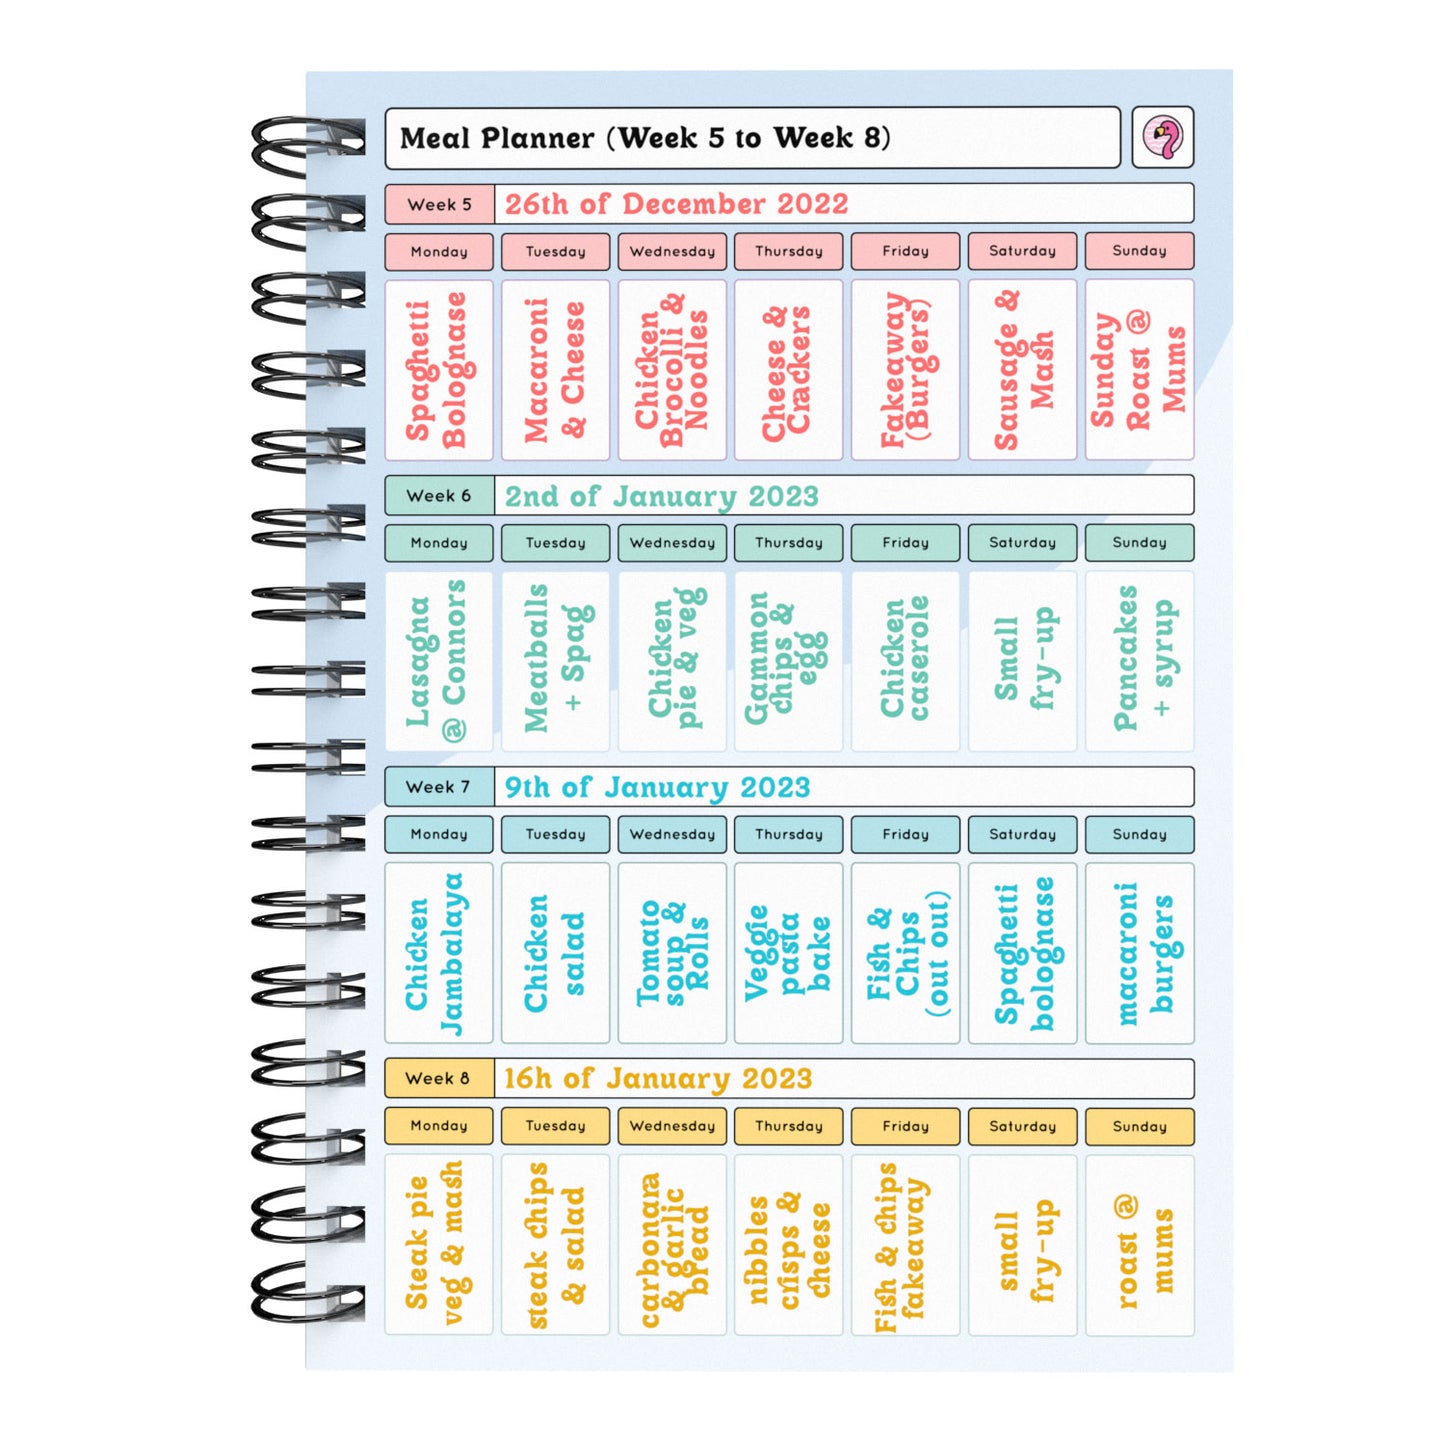 Food Diary - C61 - Calorie Counting